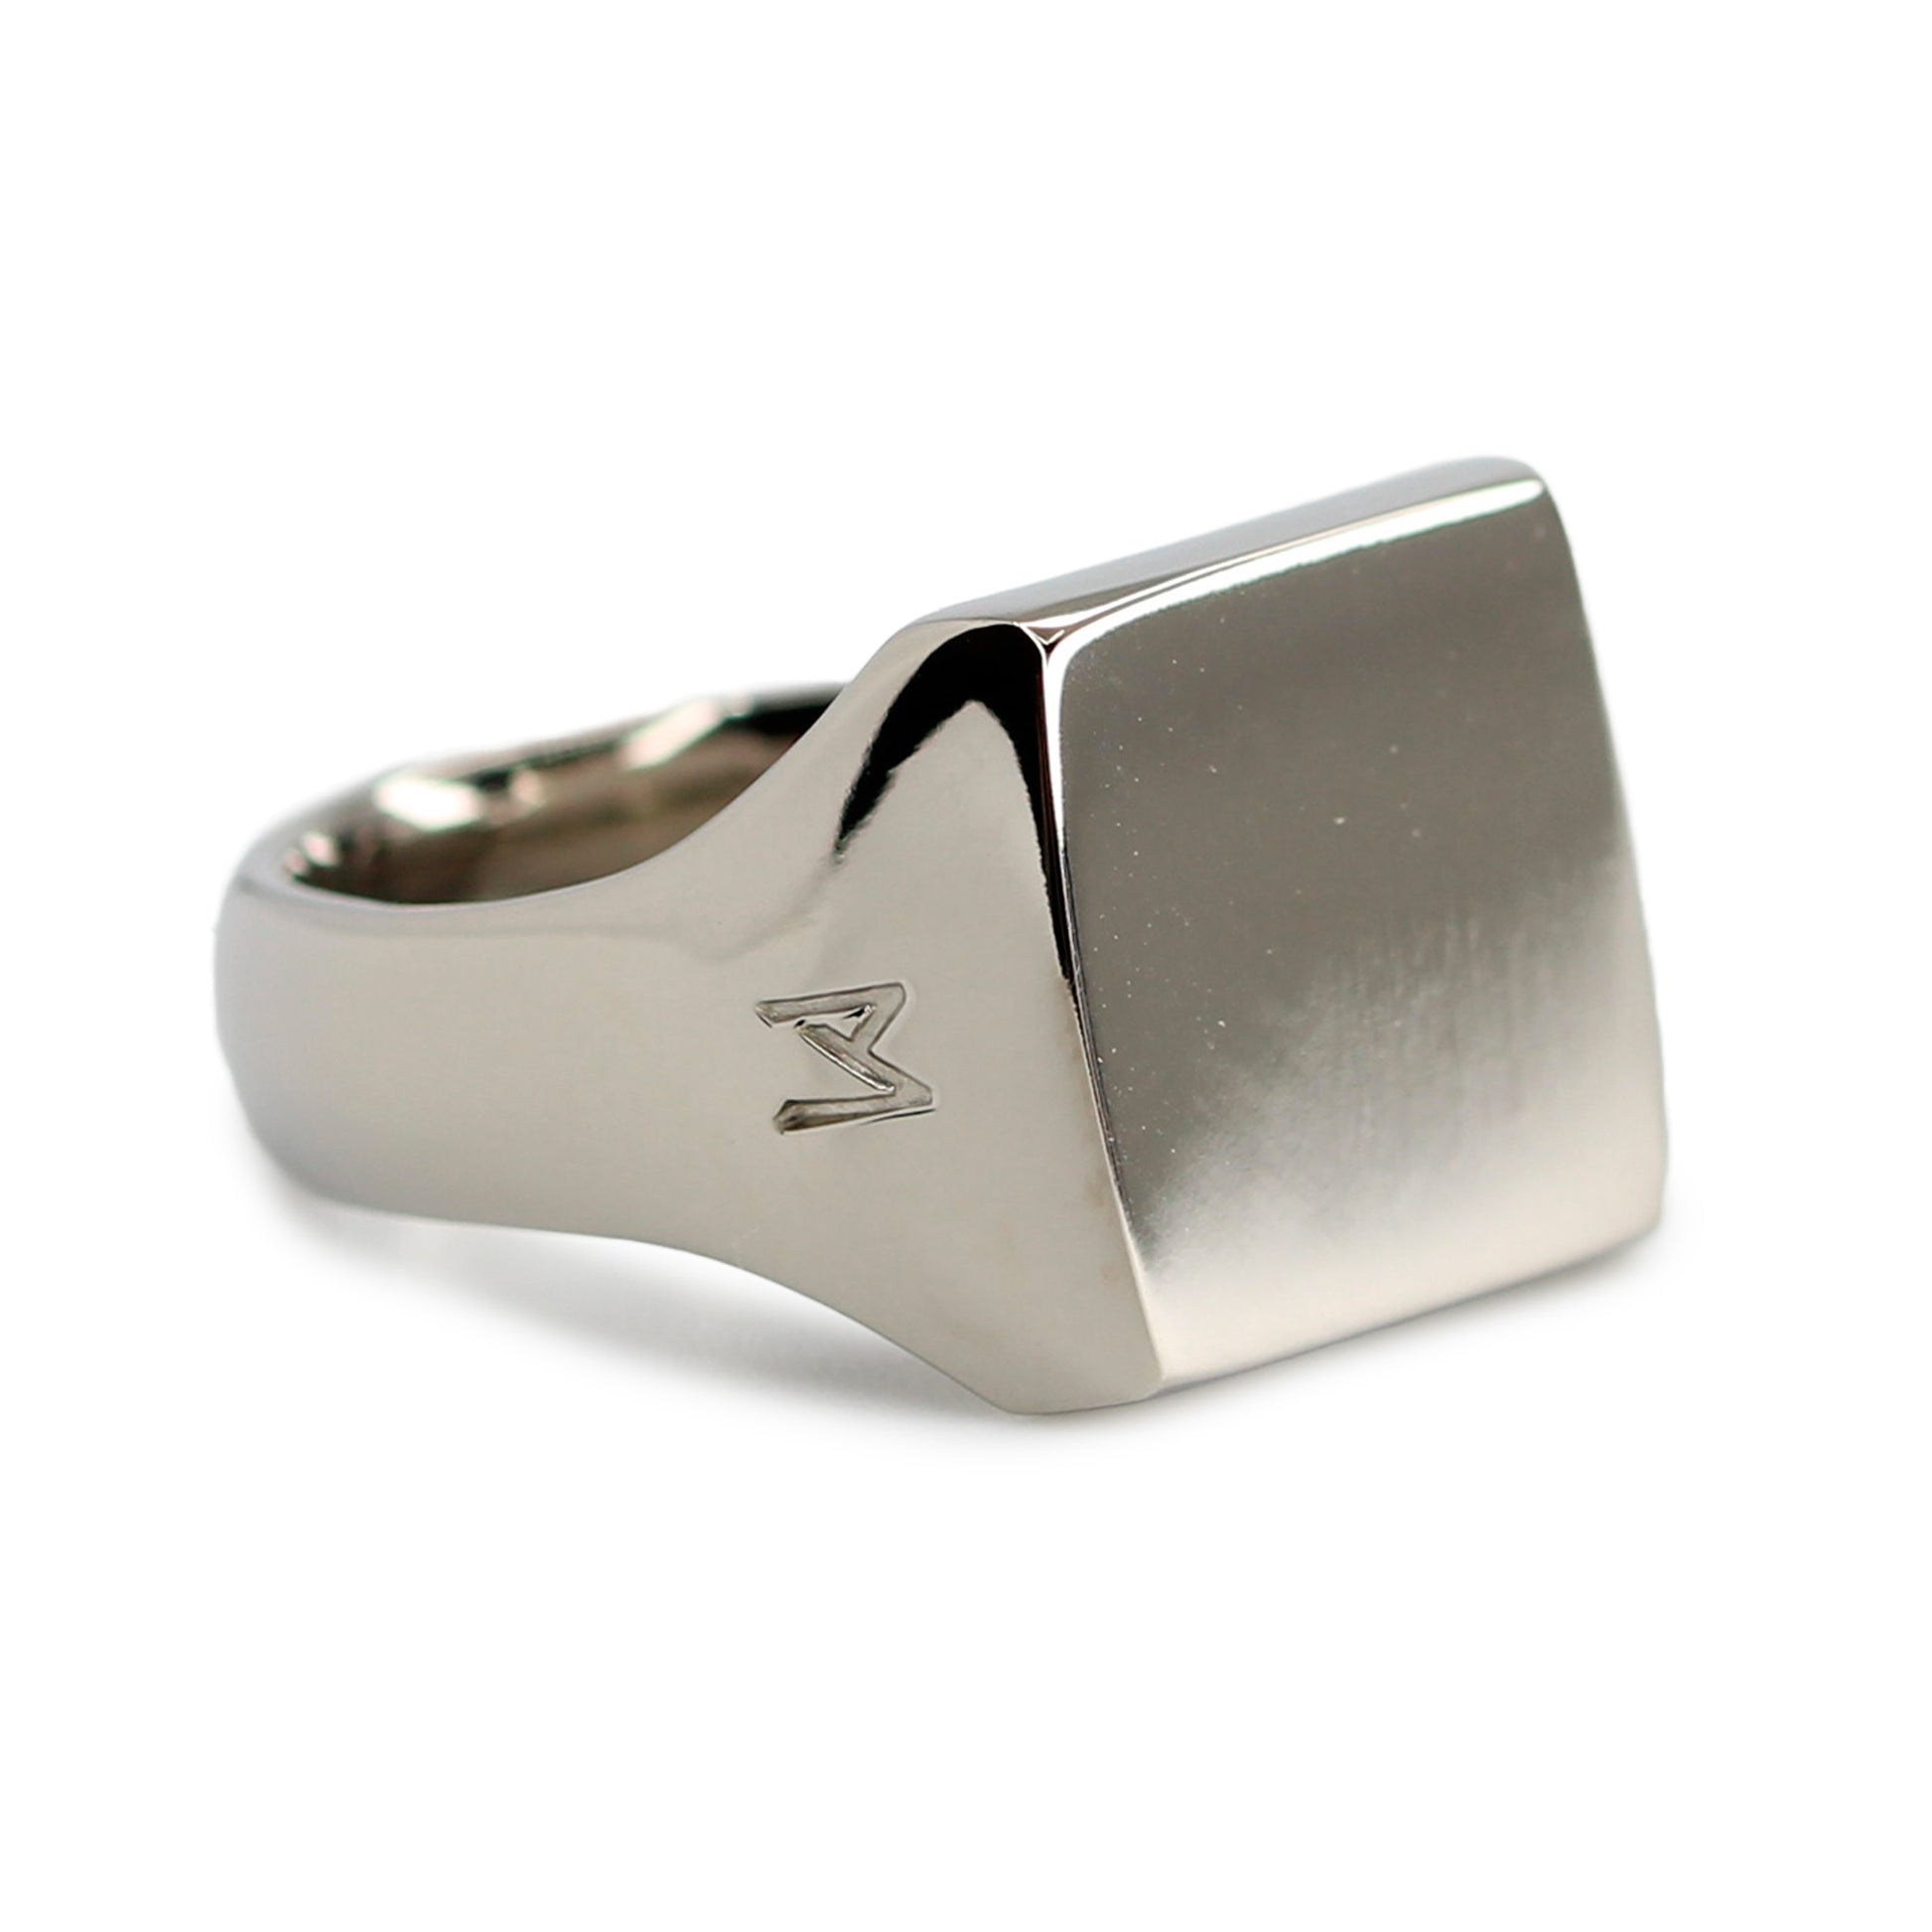 Single silver-colored titanium signet ring, 15x15 mm wide surface. Image shows corner view of the ring